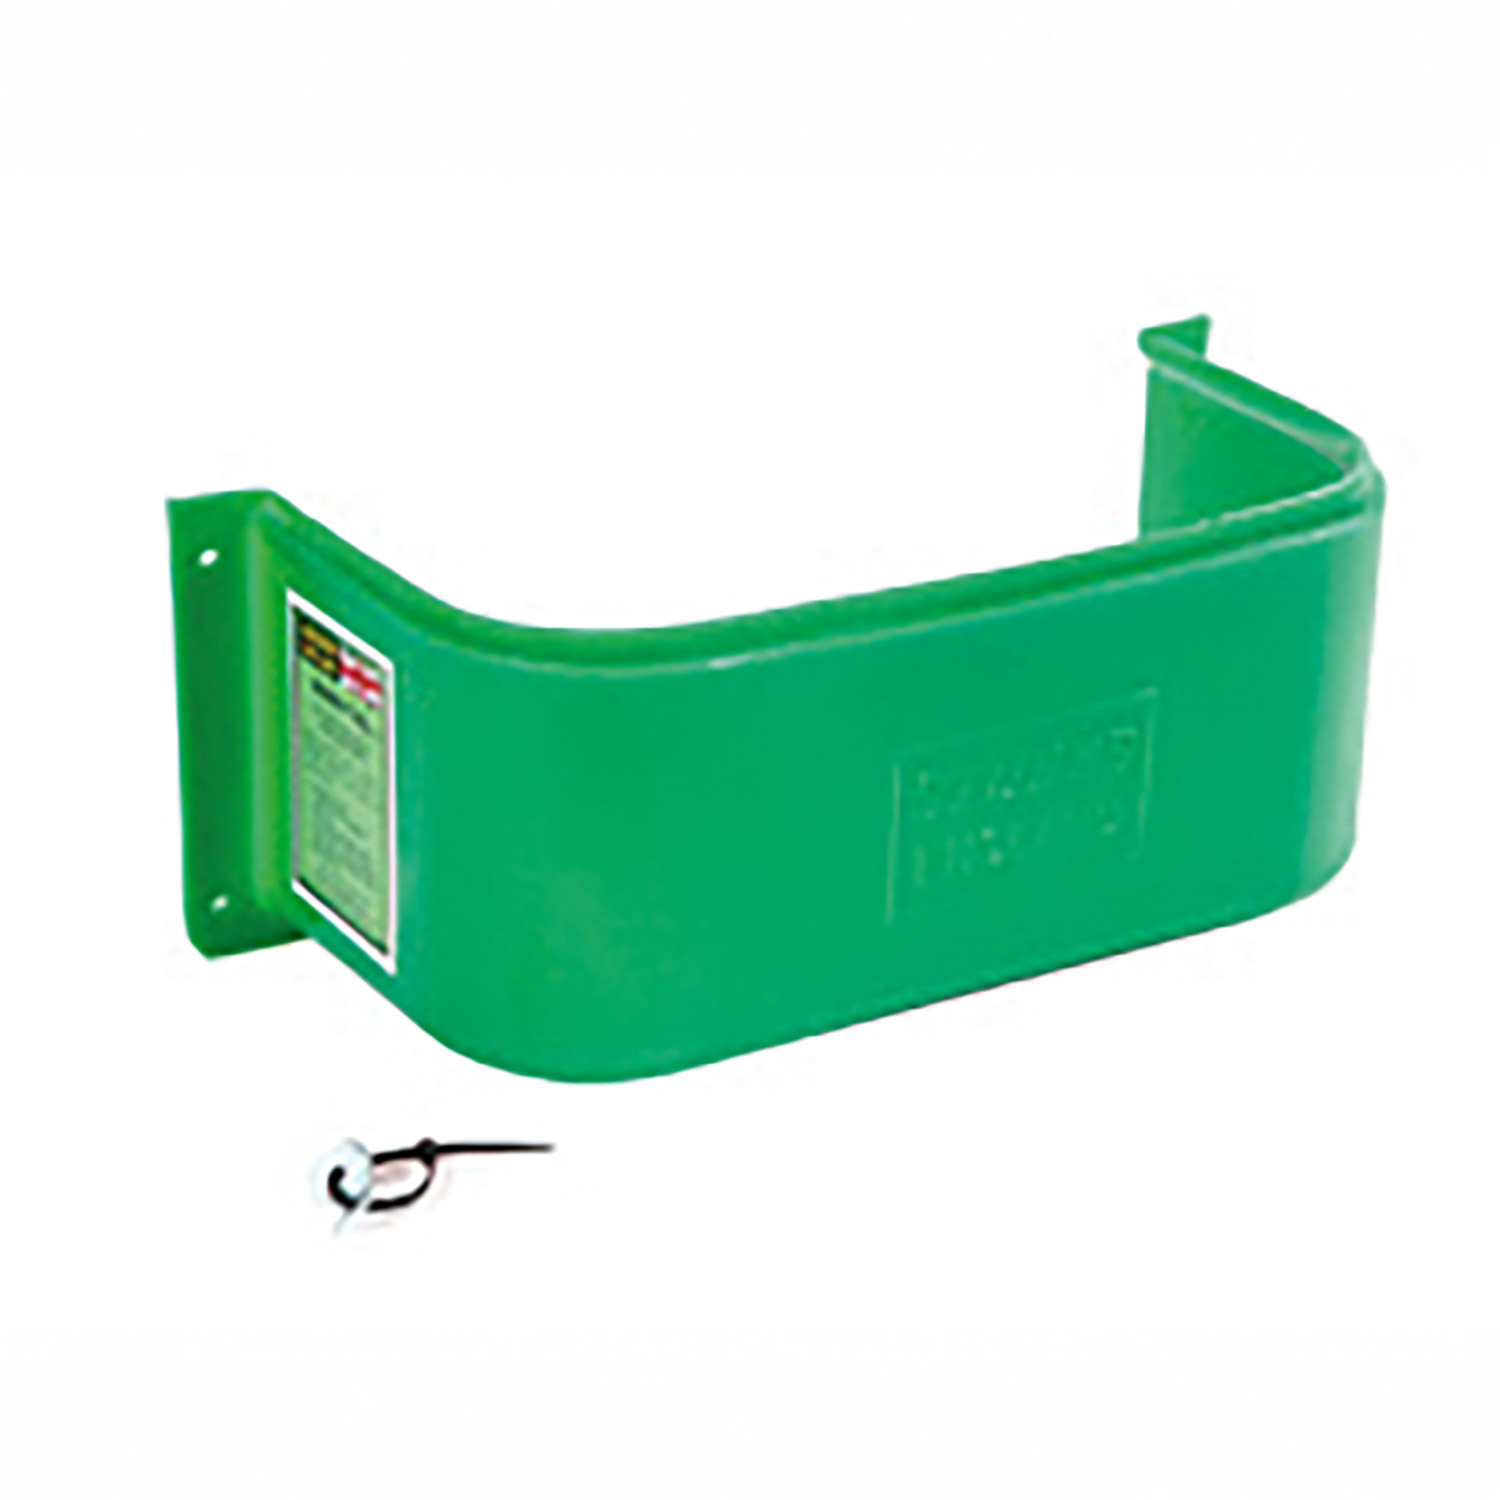 STUBBS STABLE TIDY S861 GREEN